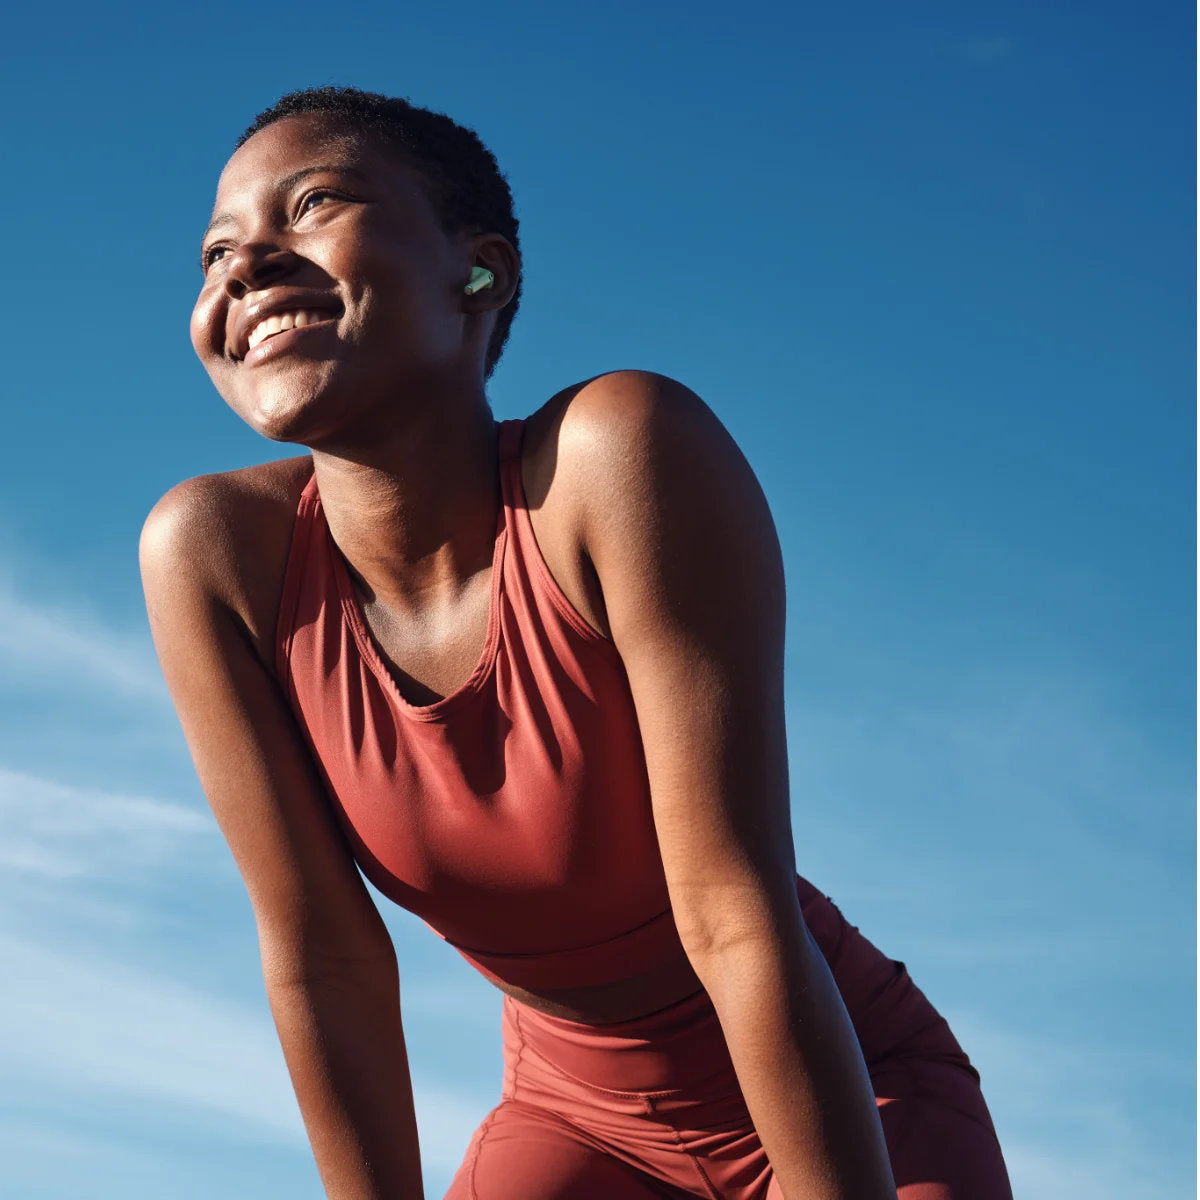 image of woman in gym gear smiling